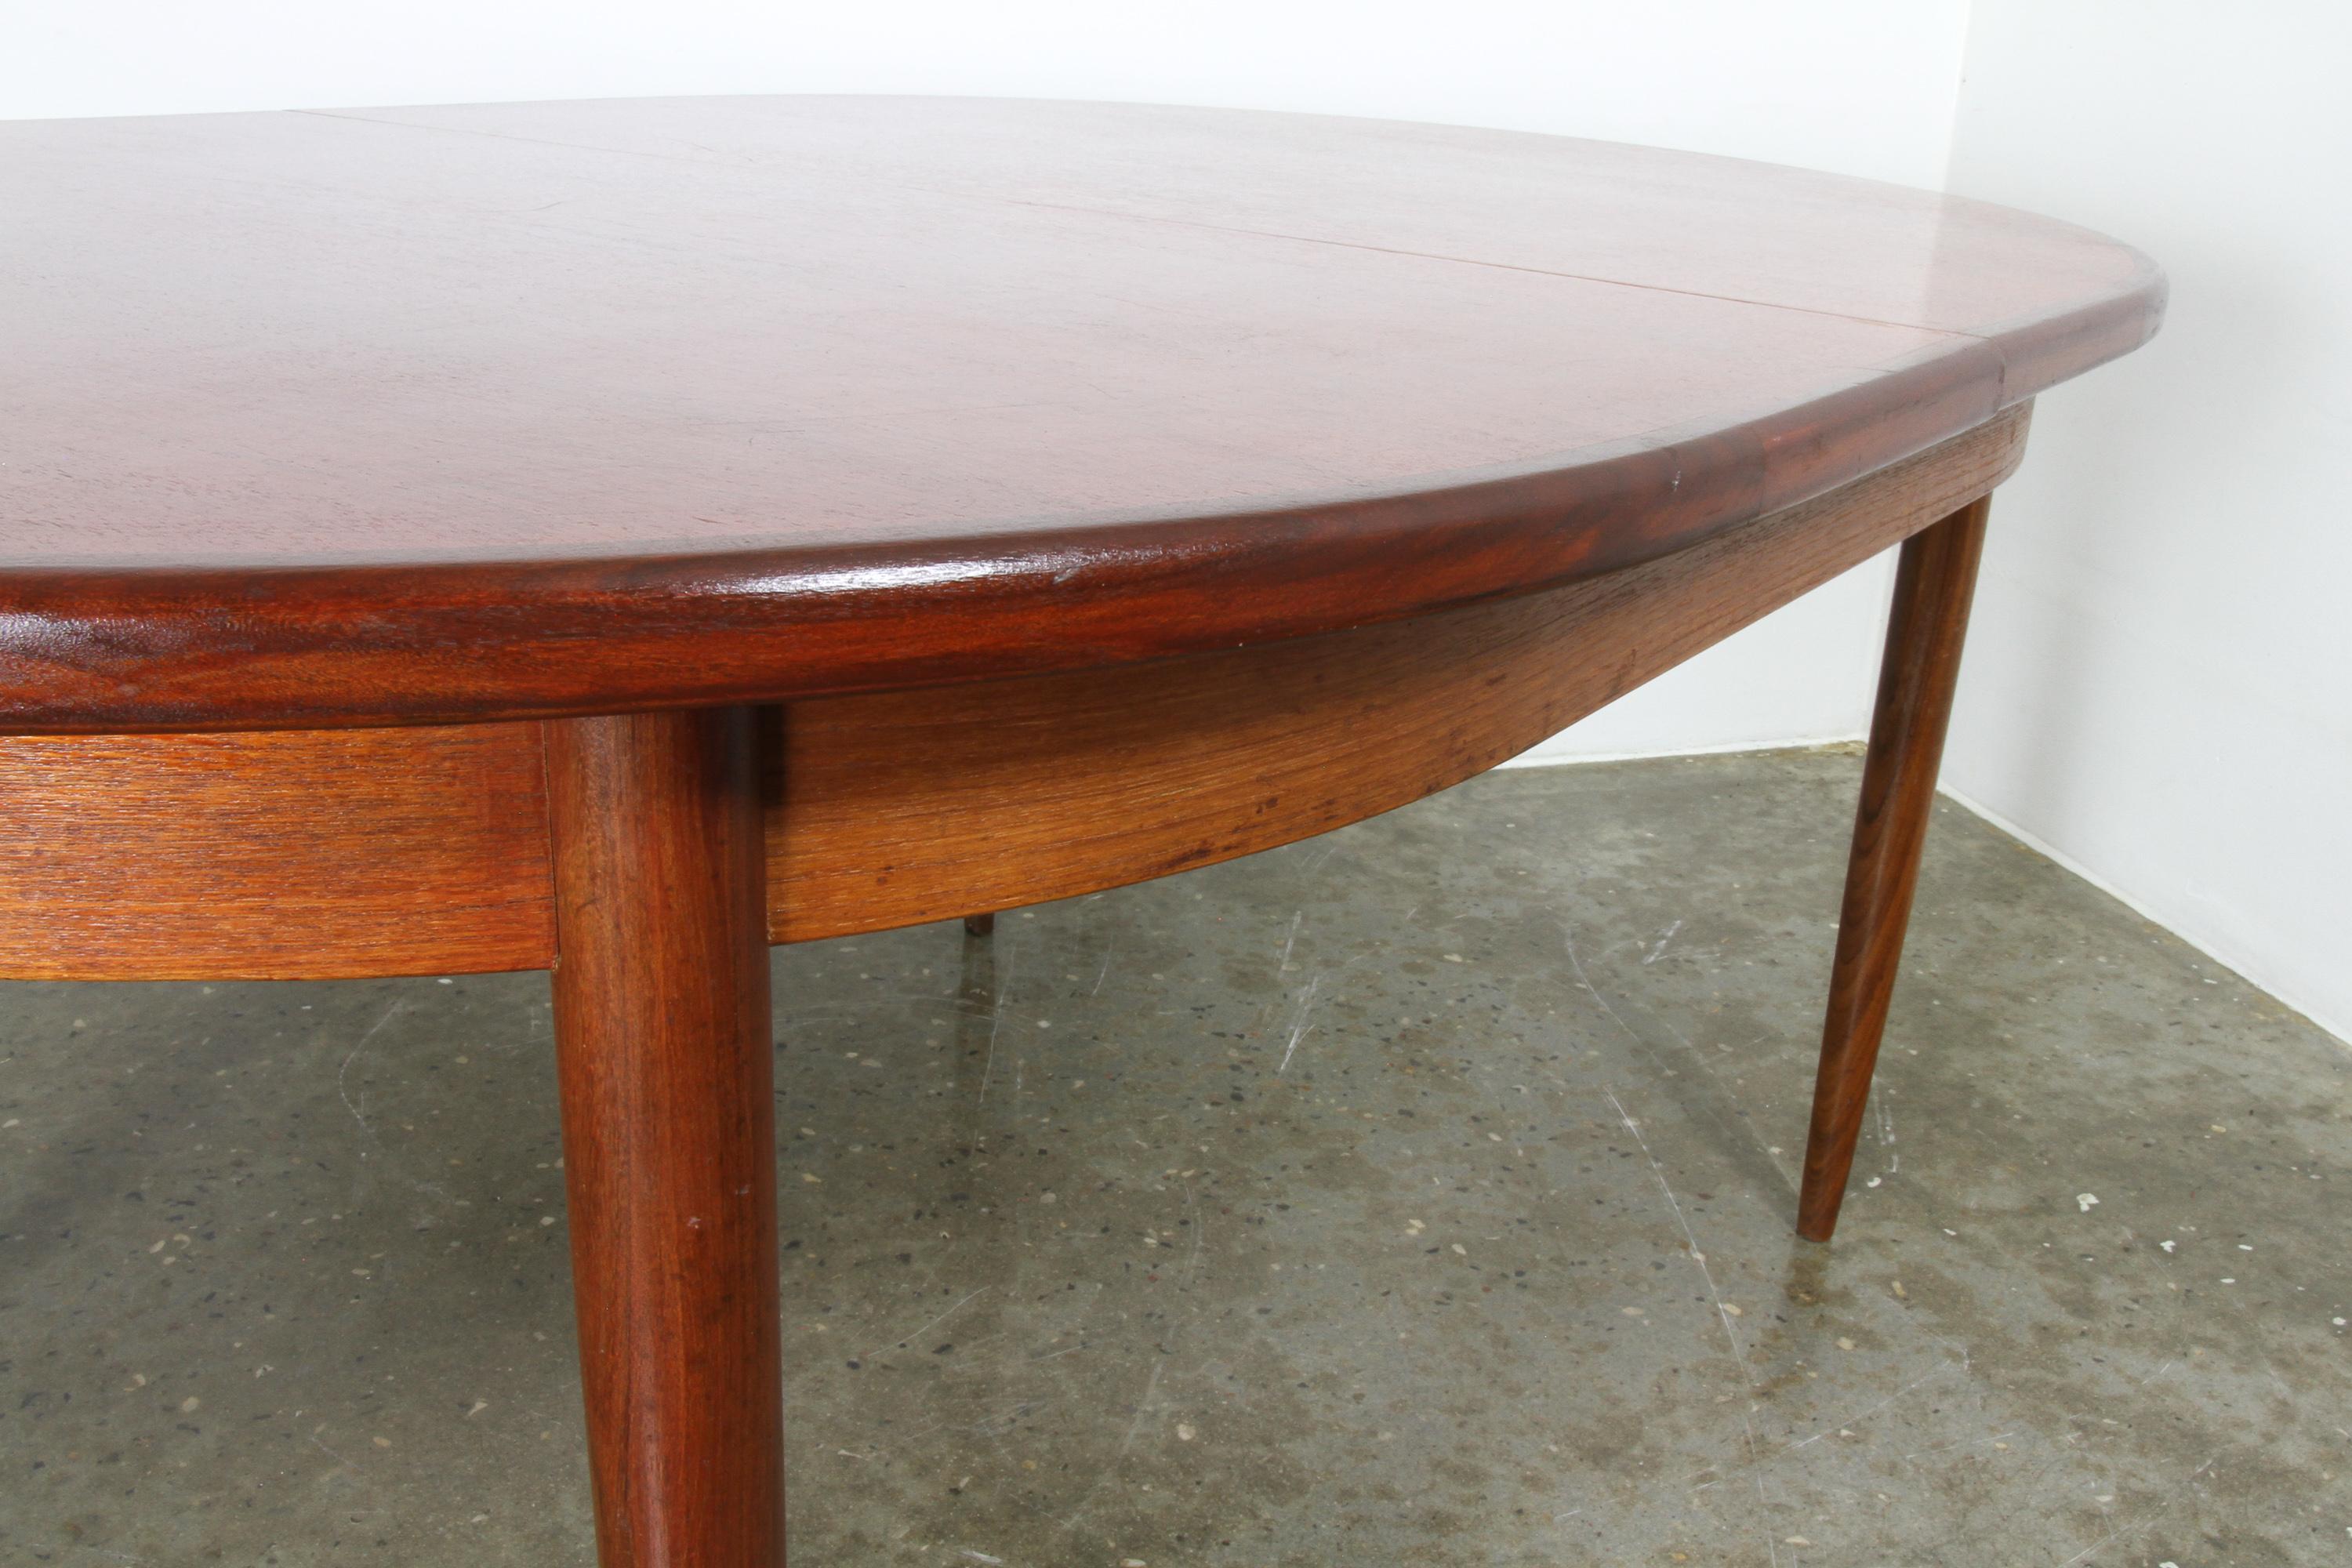 English Vintage Oval Extendable Teak and Redwood Dining Table by G-Plan, 1960s